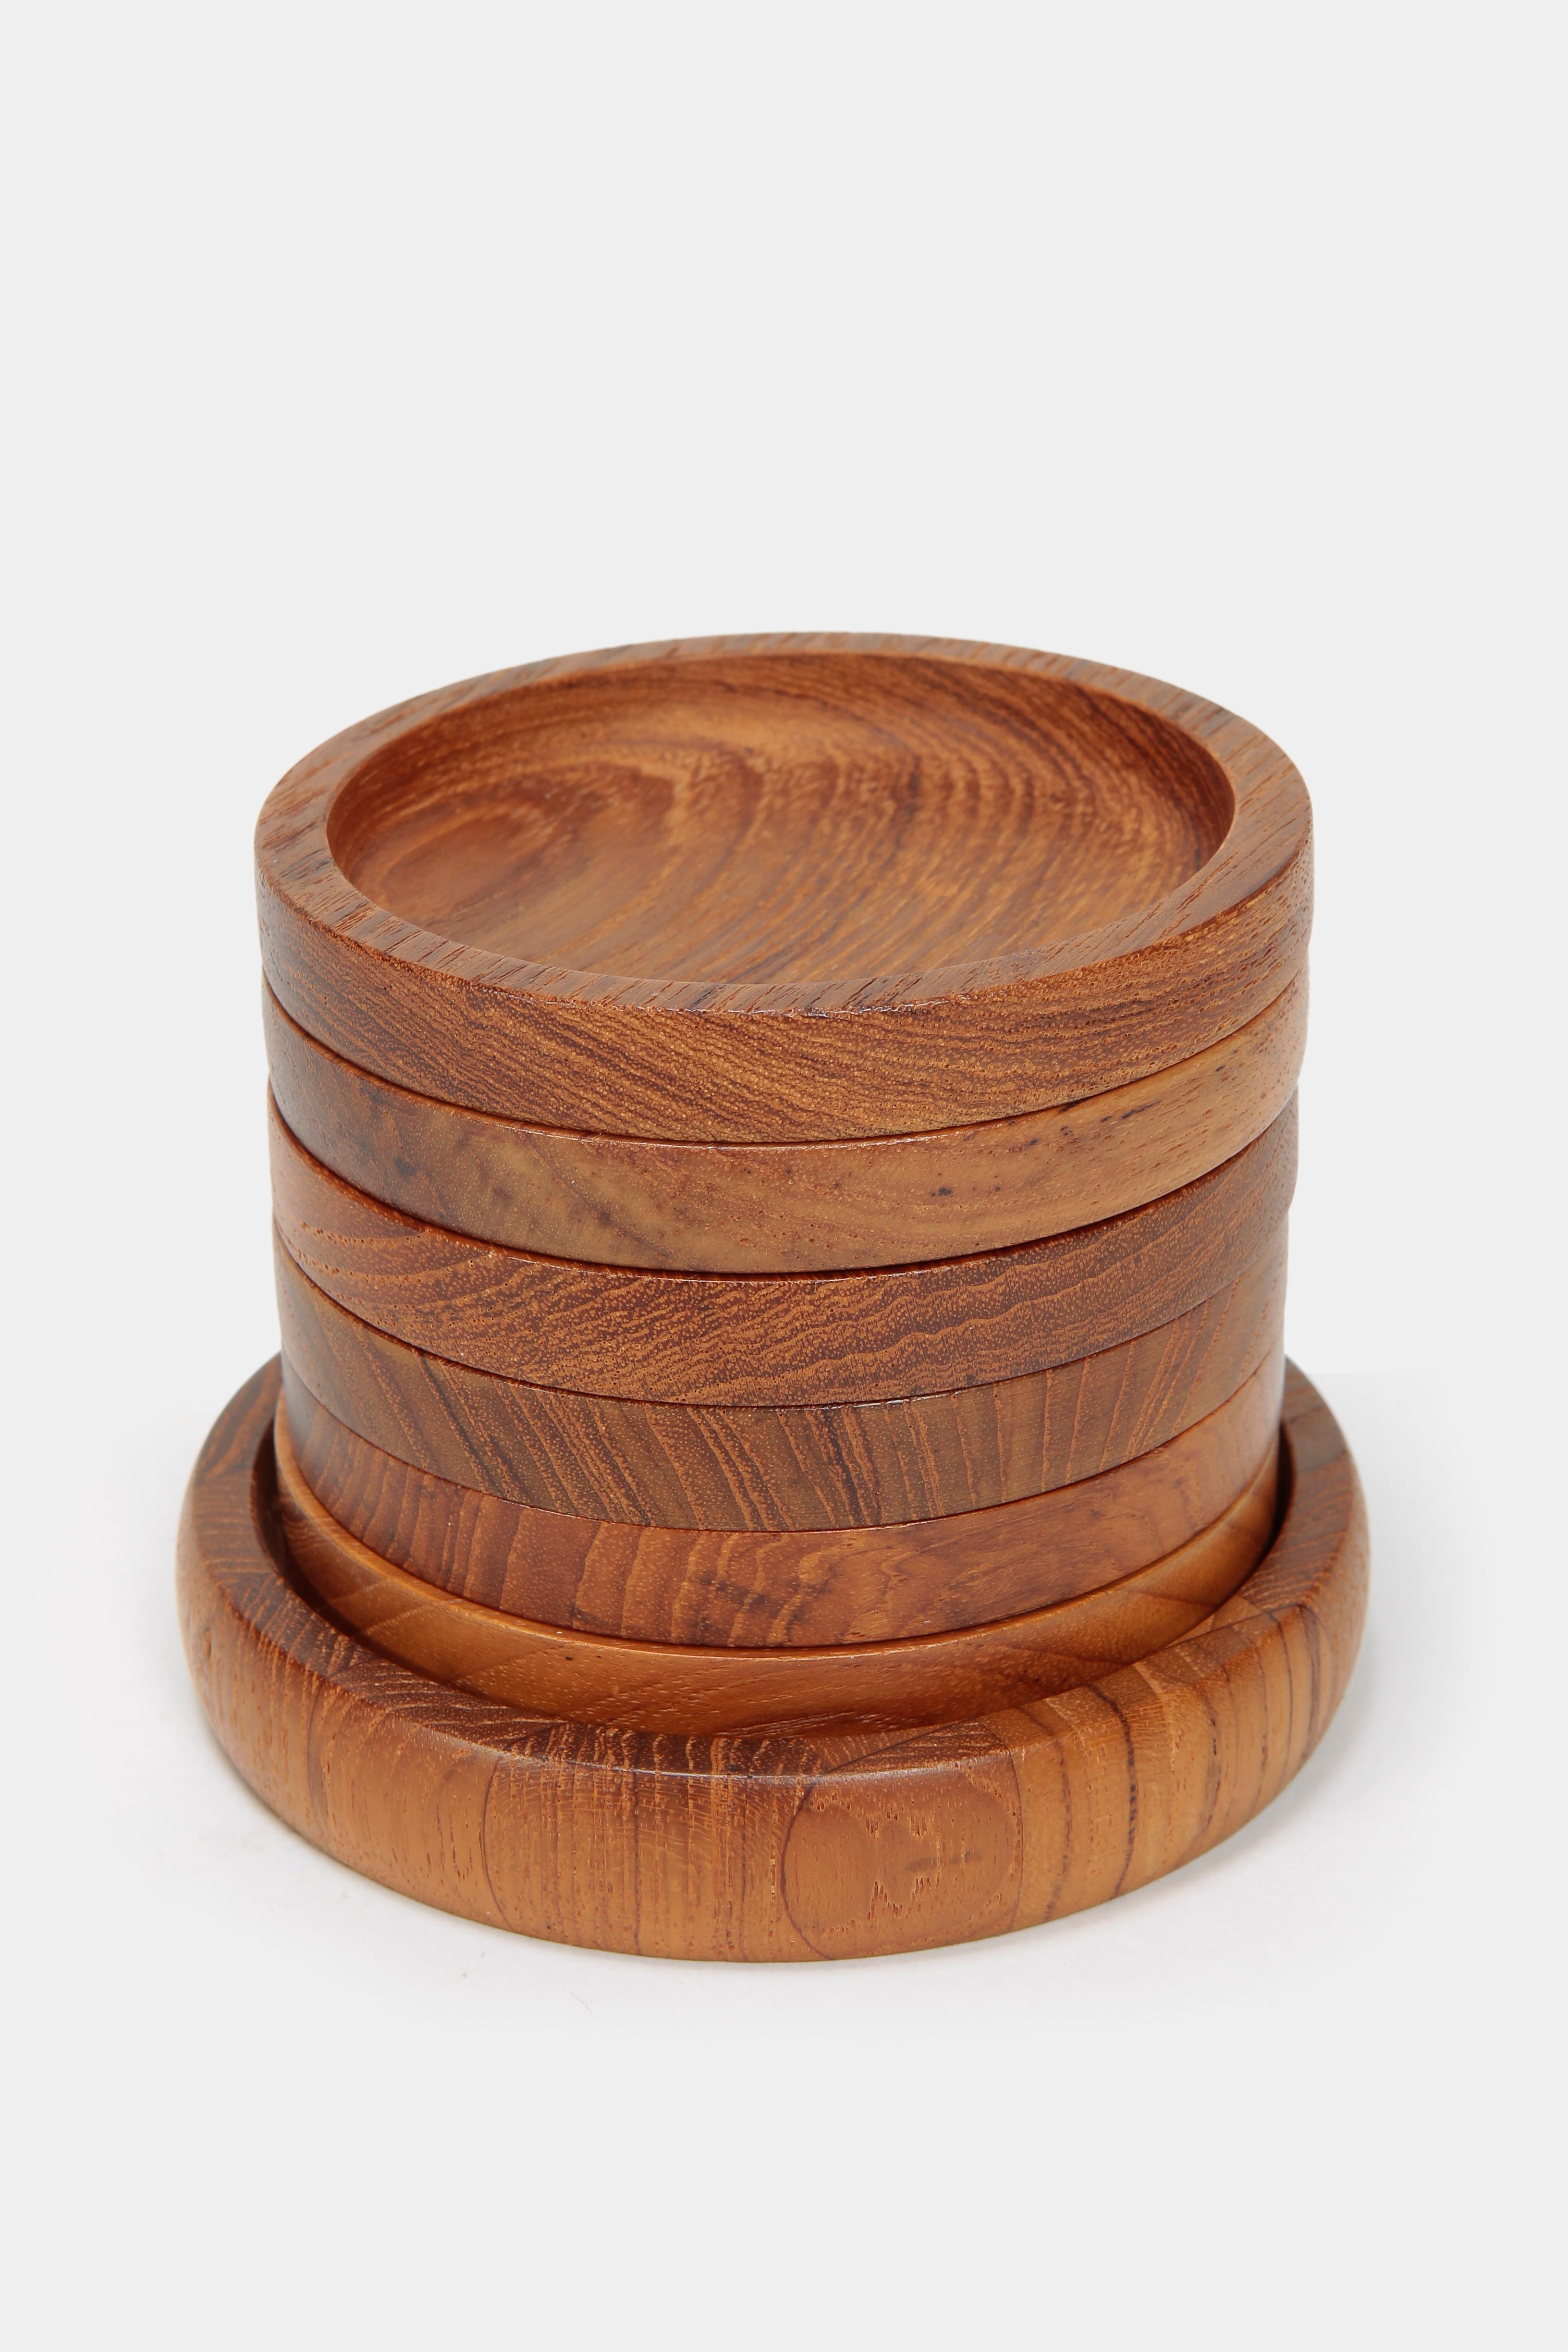 Set of solid teak coasters from the company Digsmed, made in the seventies in Denmark. Very beautiful object showcasing all the facets of teakwood. Timeless design.